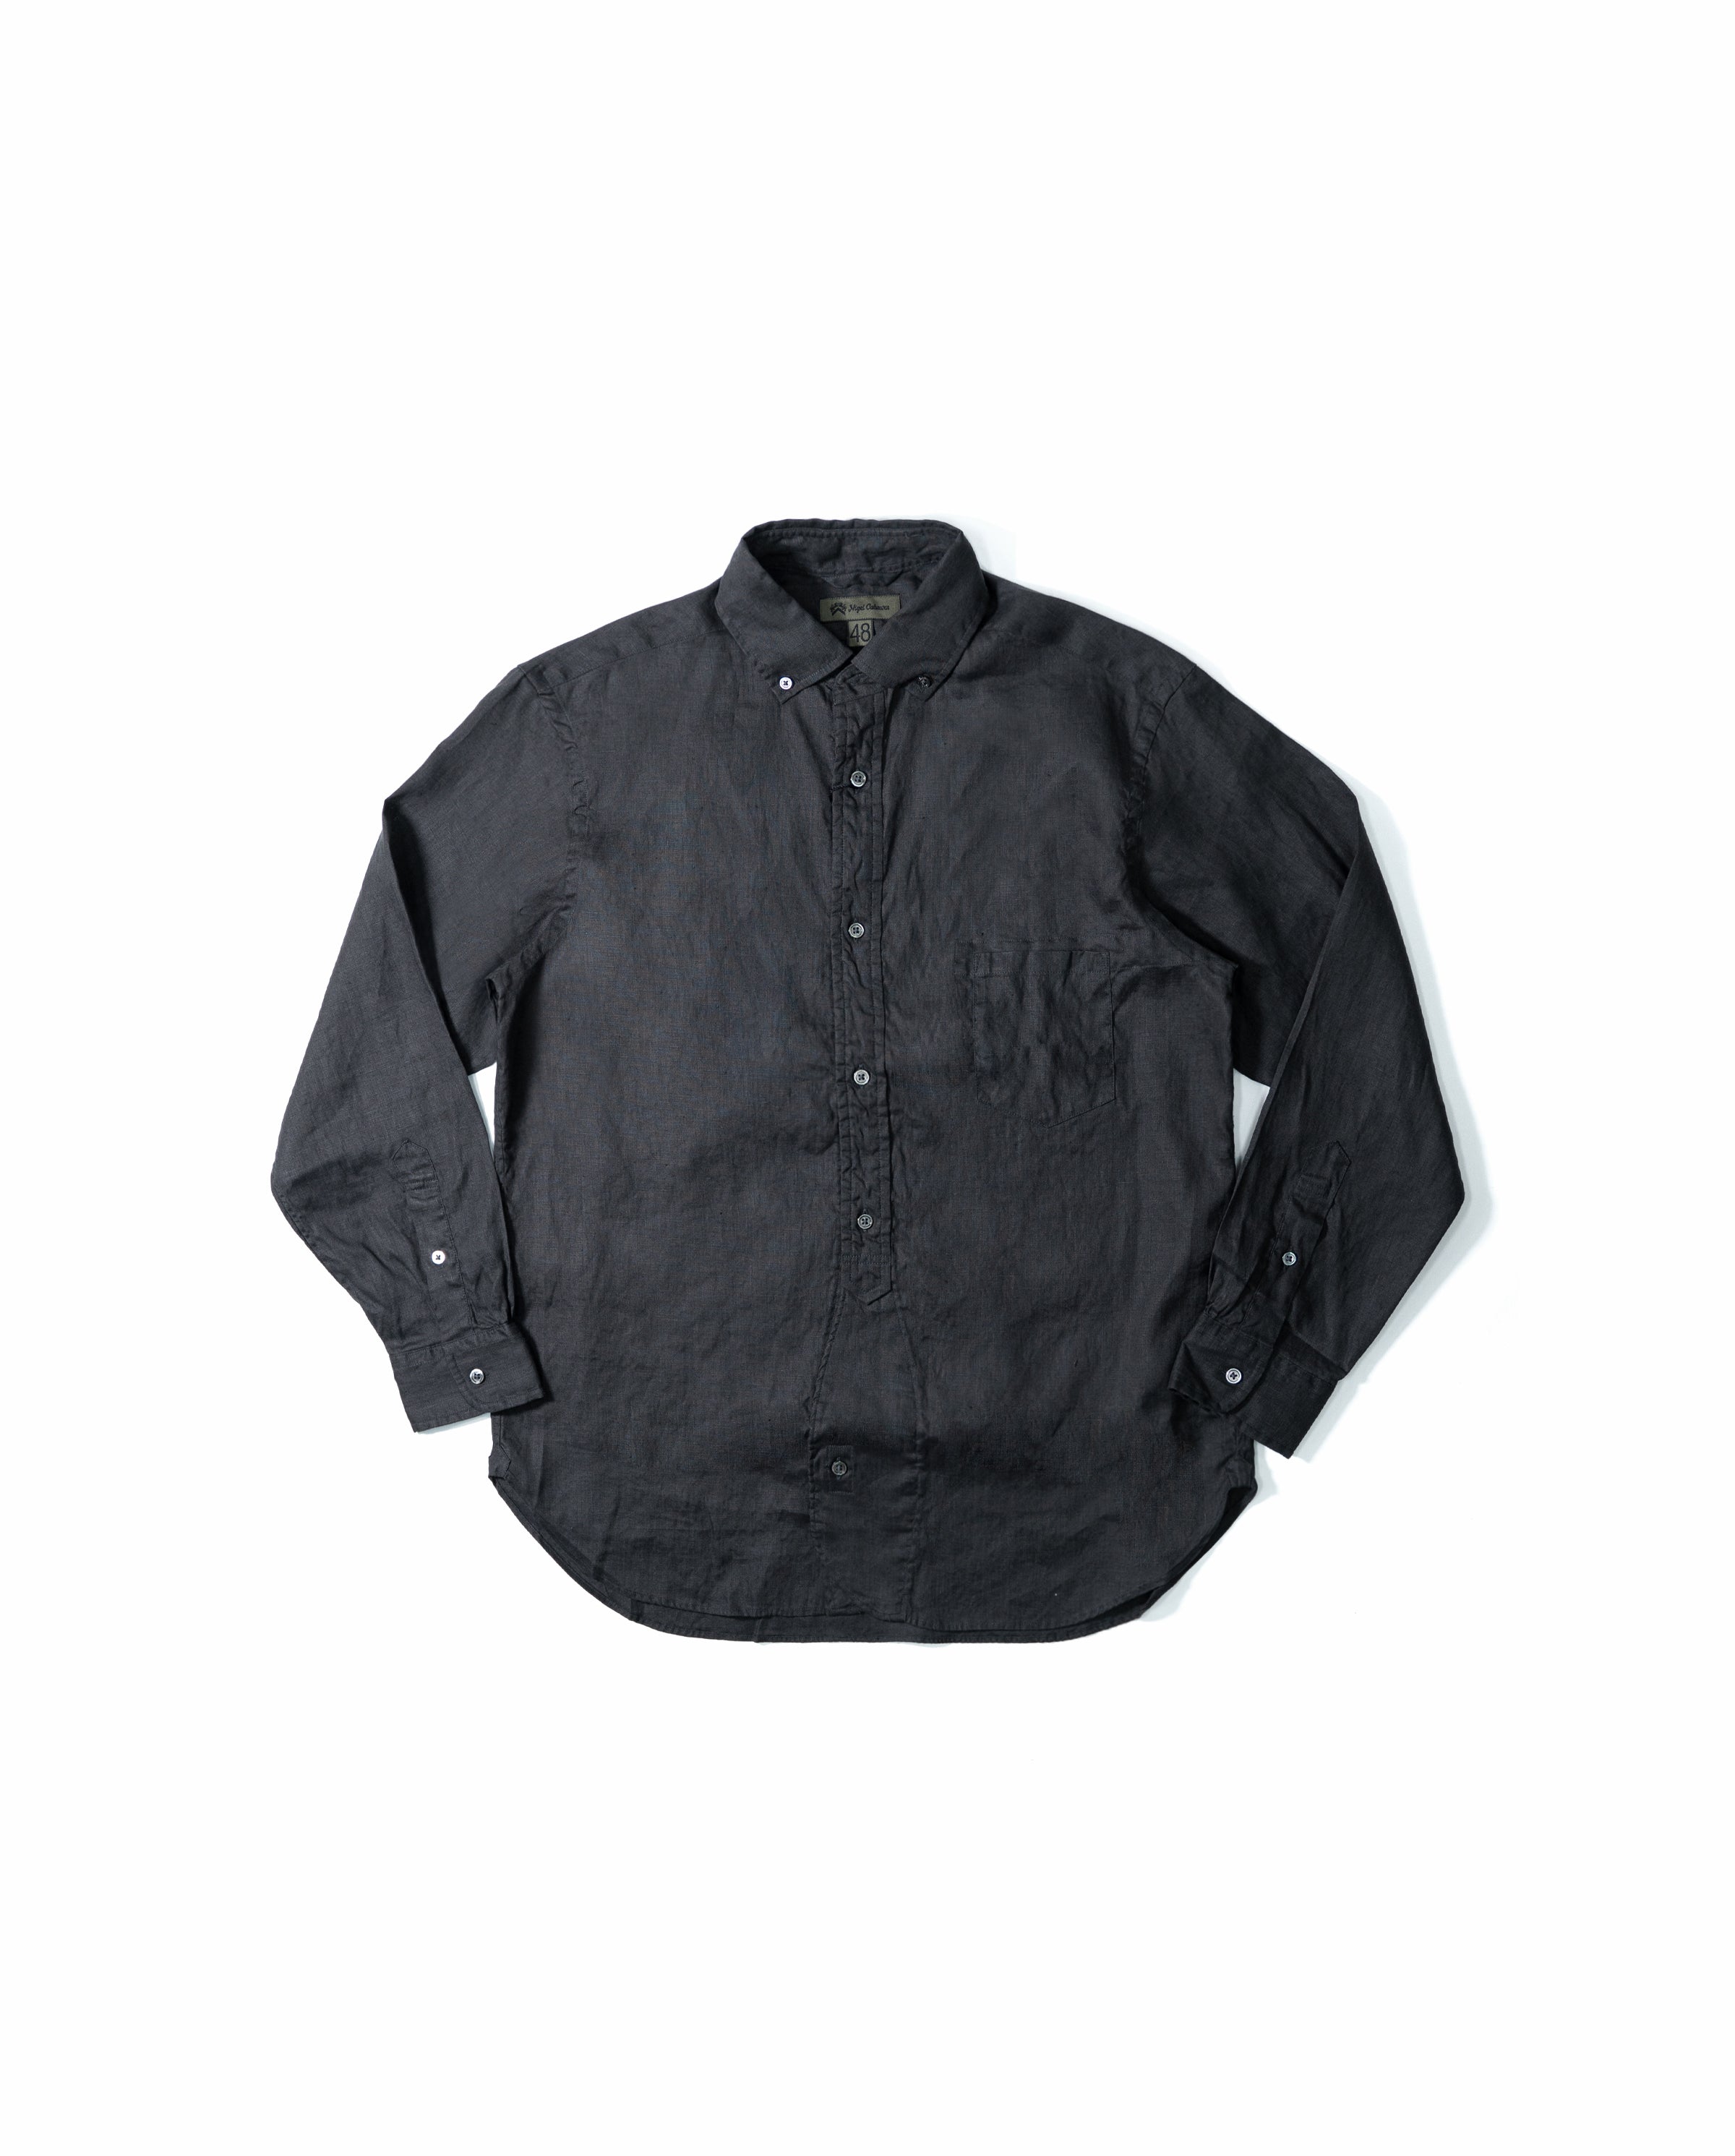 British Officers Shirt Type 2 8046001005-1 | Charcoal Gray